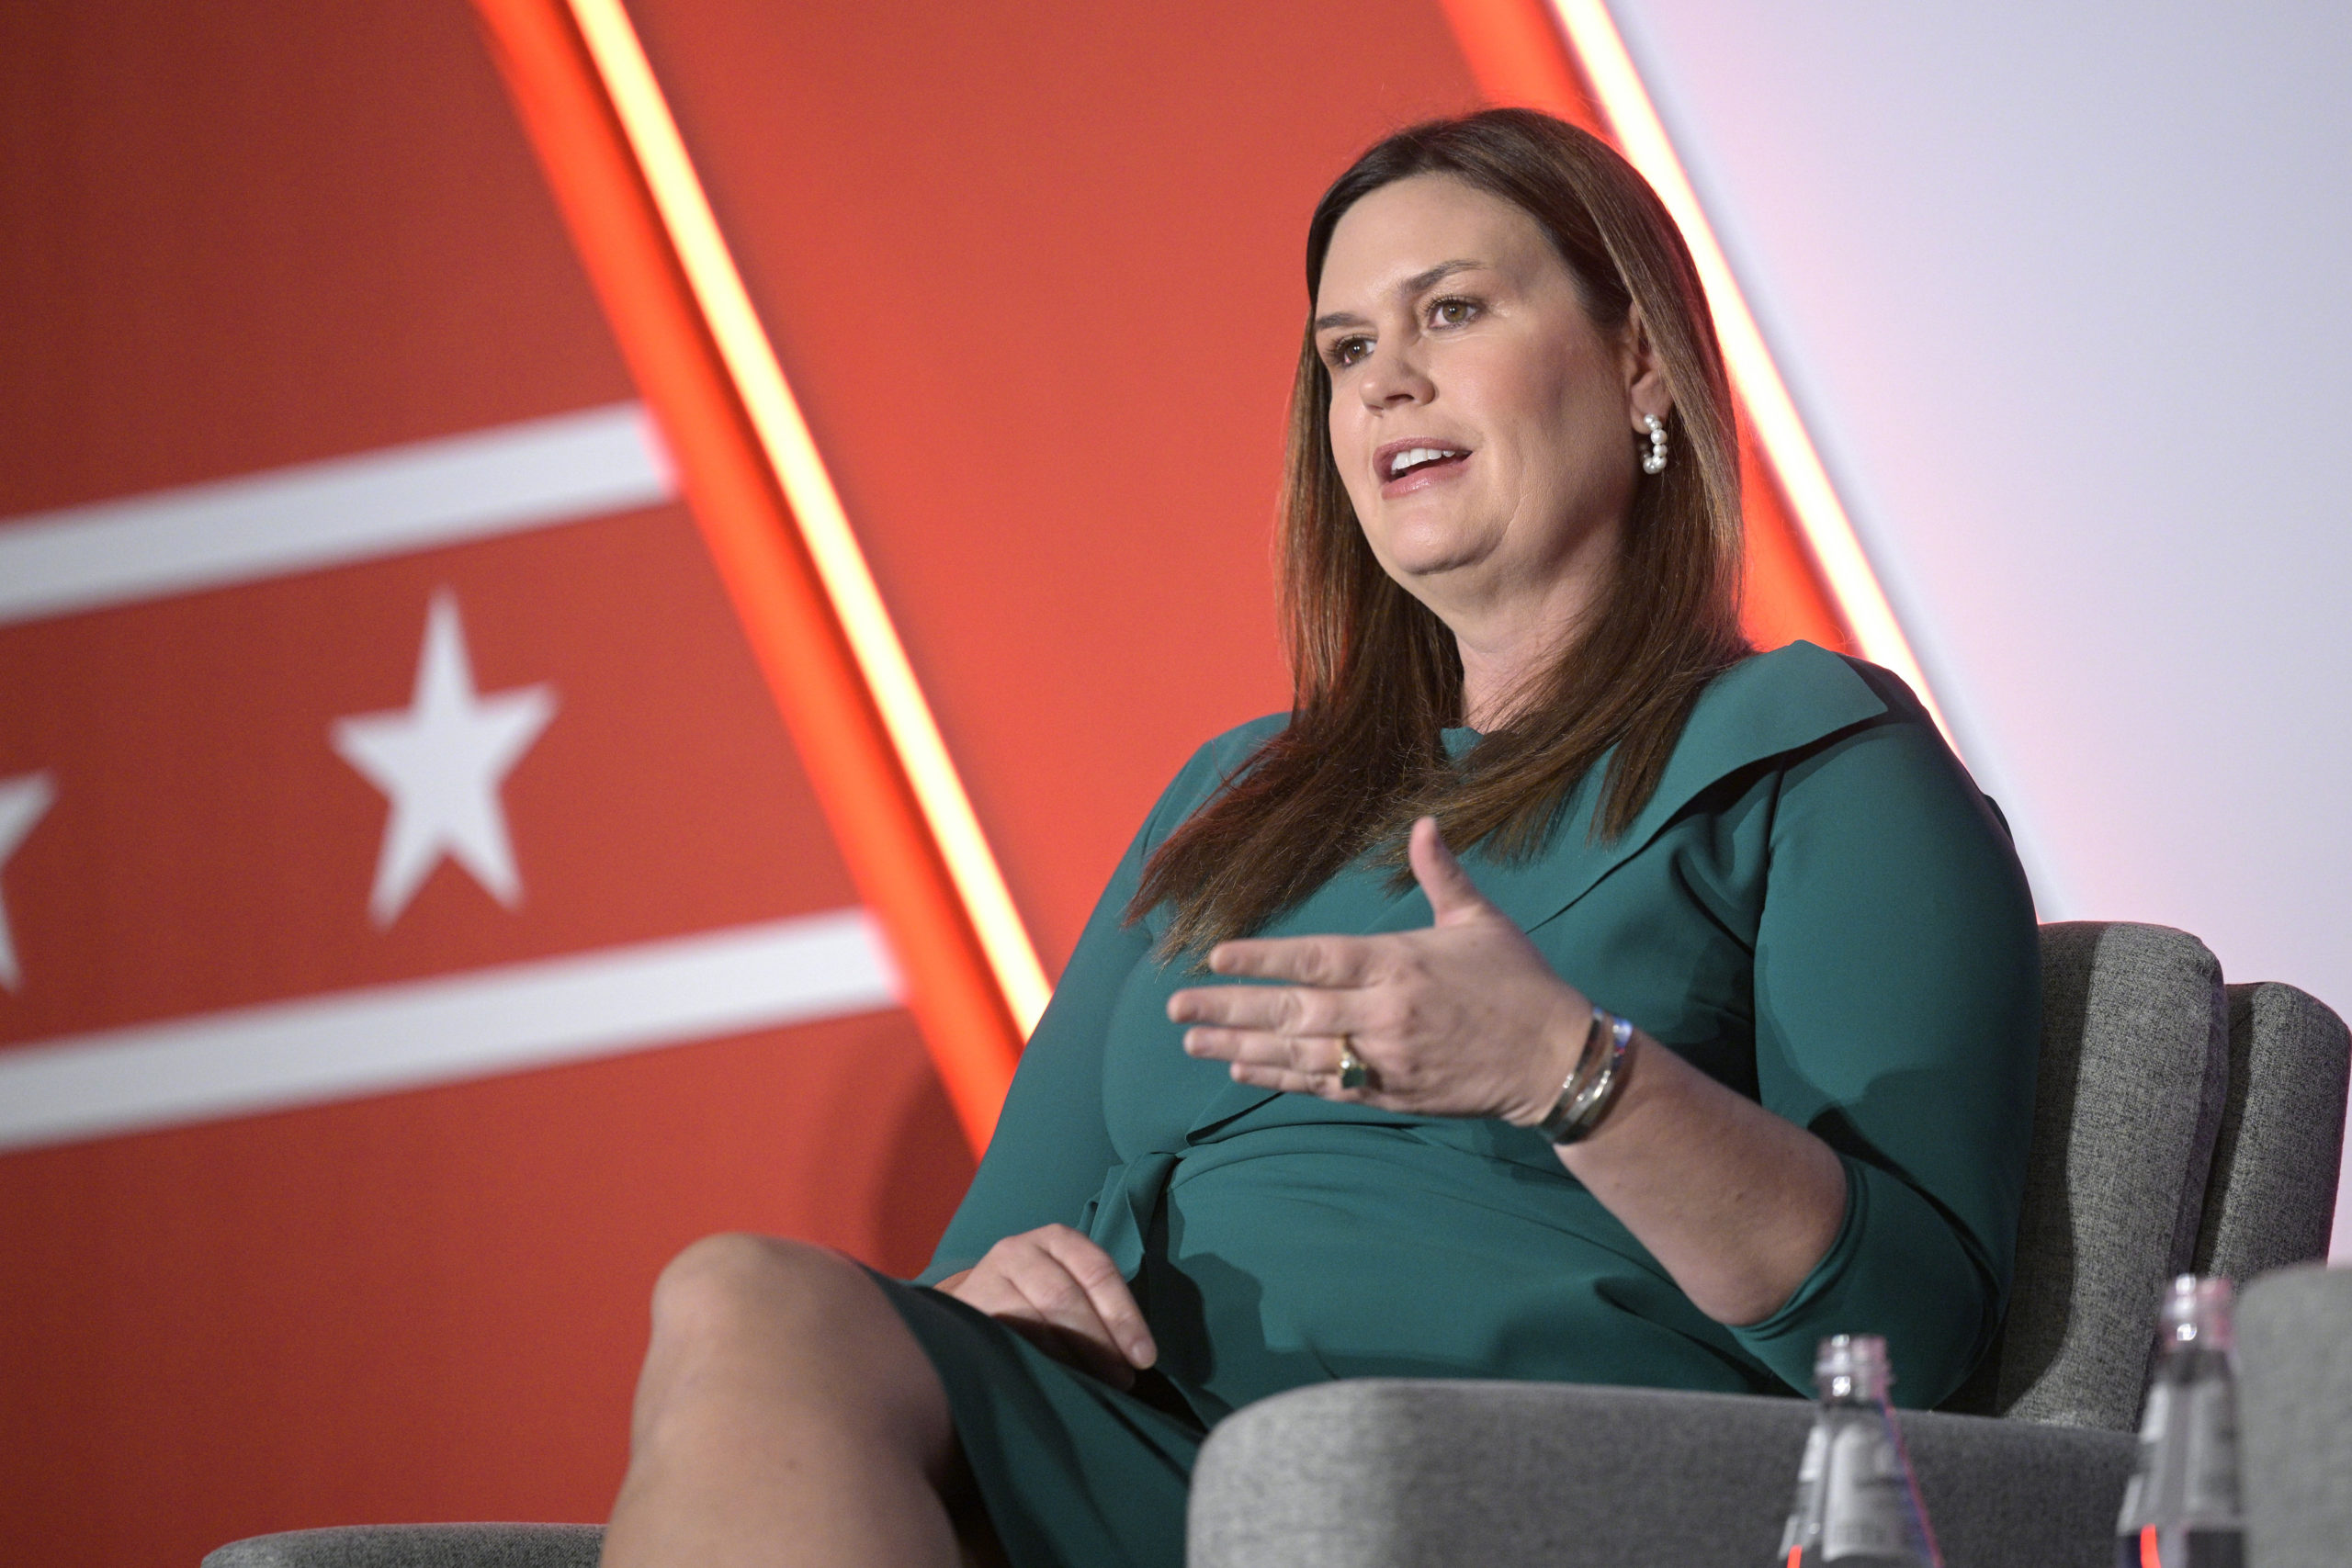 Arkansas Governor-elect Sarah Huckabee Sanders answers a question while taking part in a panel discussion during a Republican Governors Association conference in Orlando, Florida, on Nov. 16.